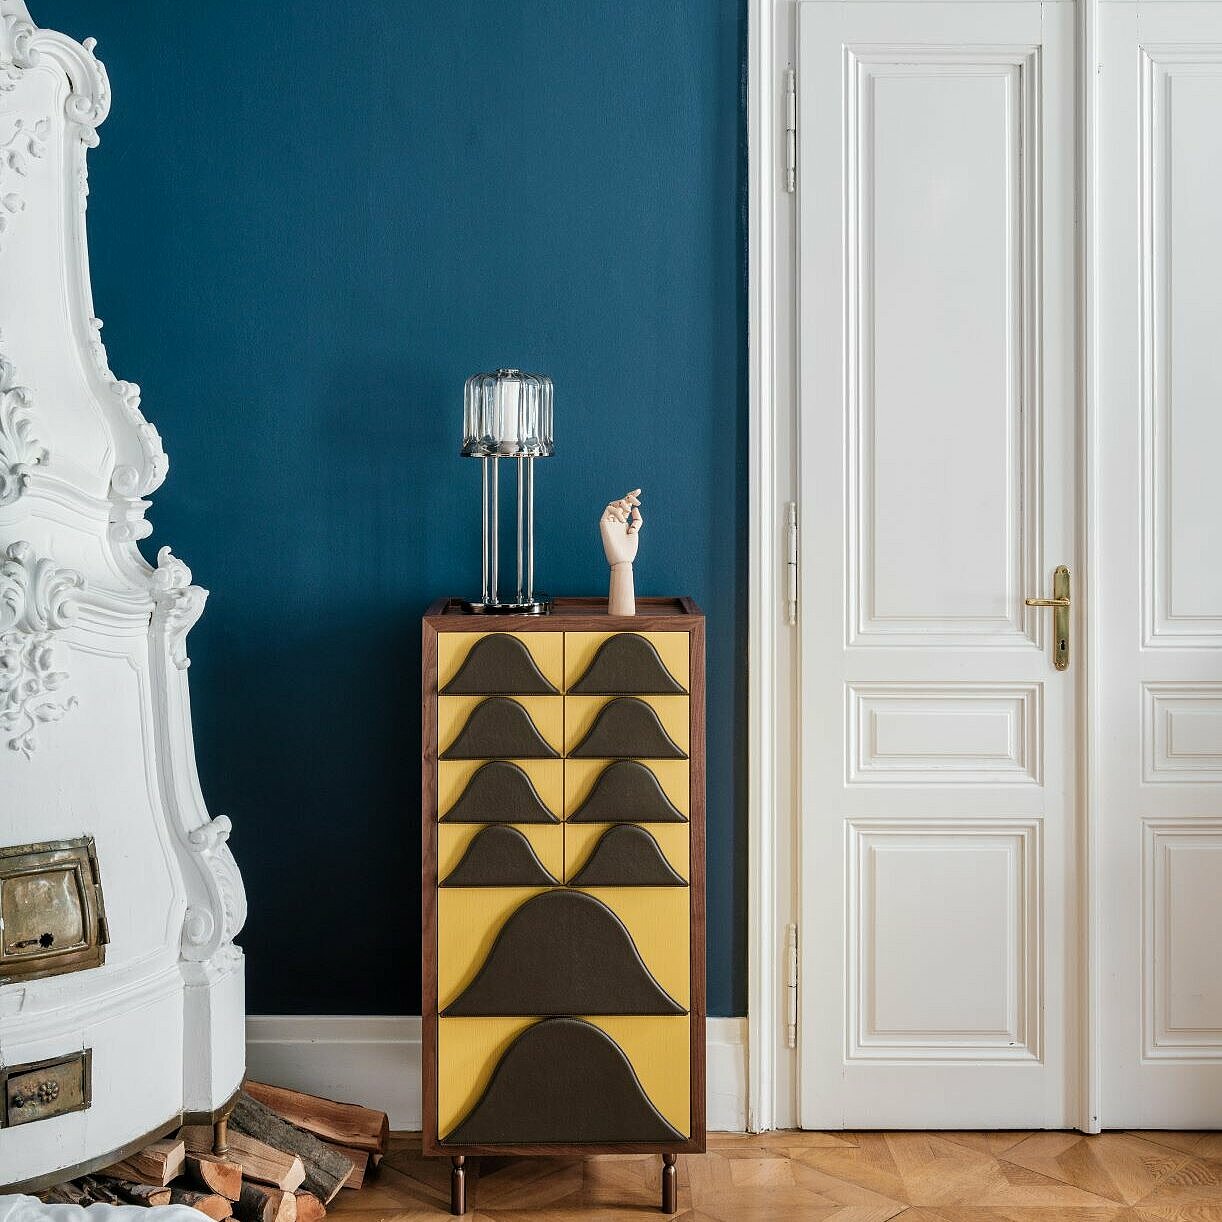 medium Antigua cabinet in yellow with brown leather handles and acacia table lamp in front of blue wall